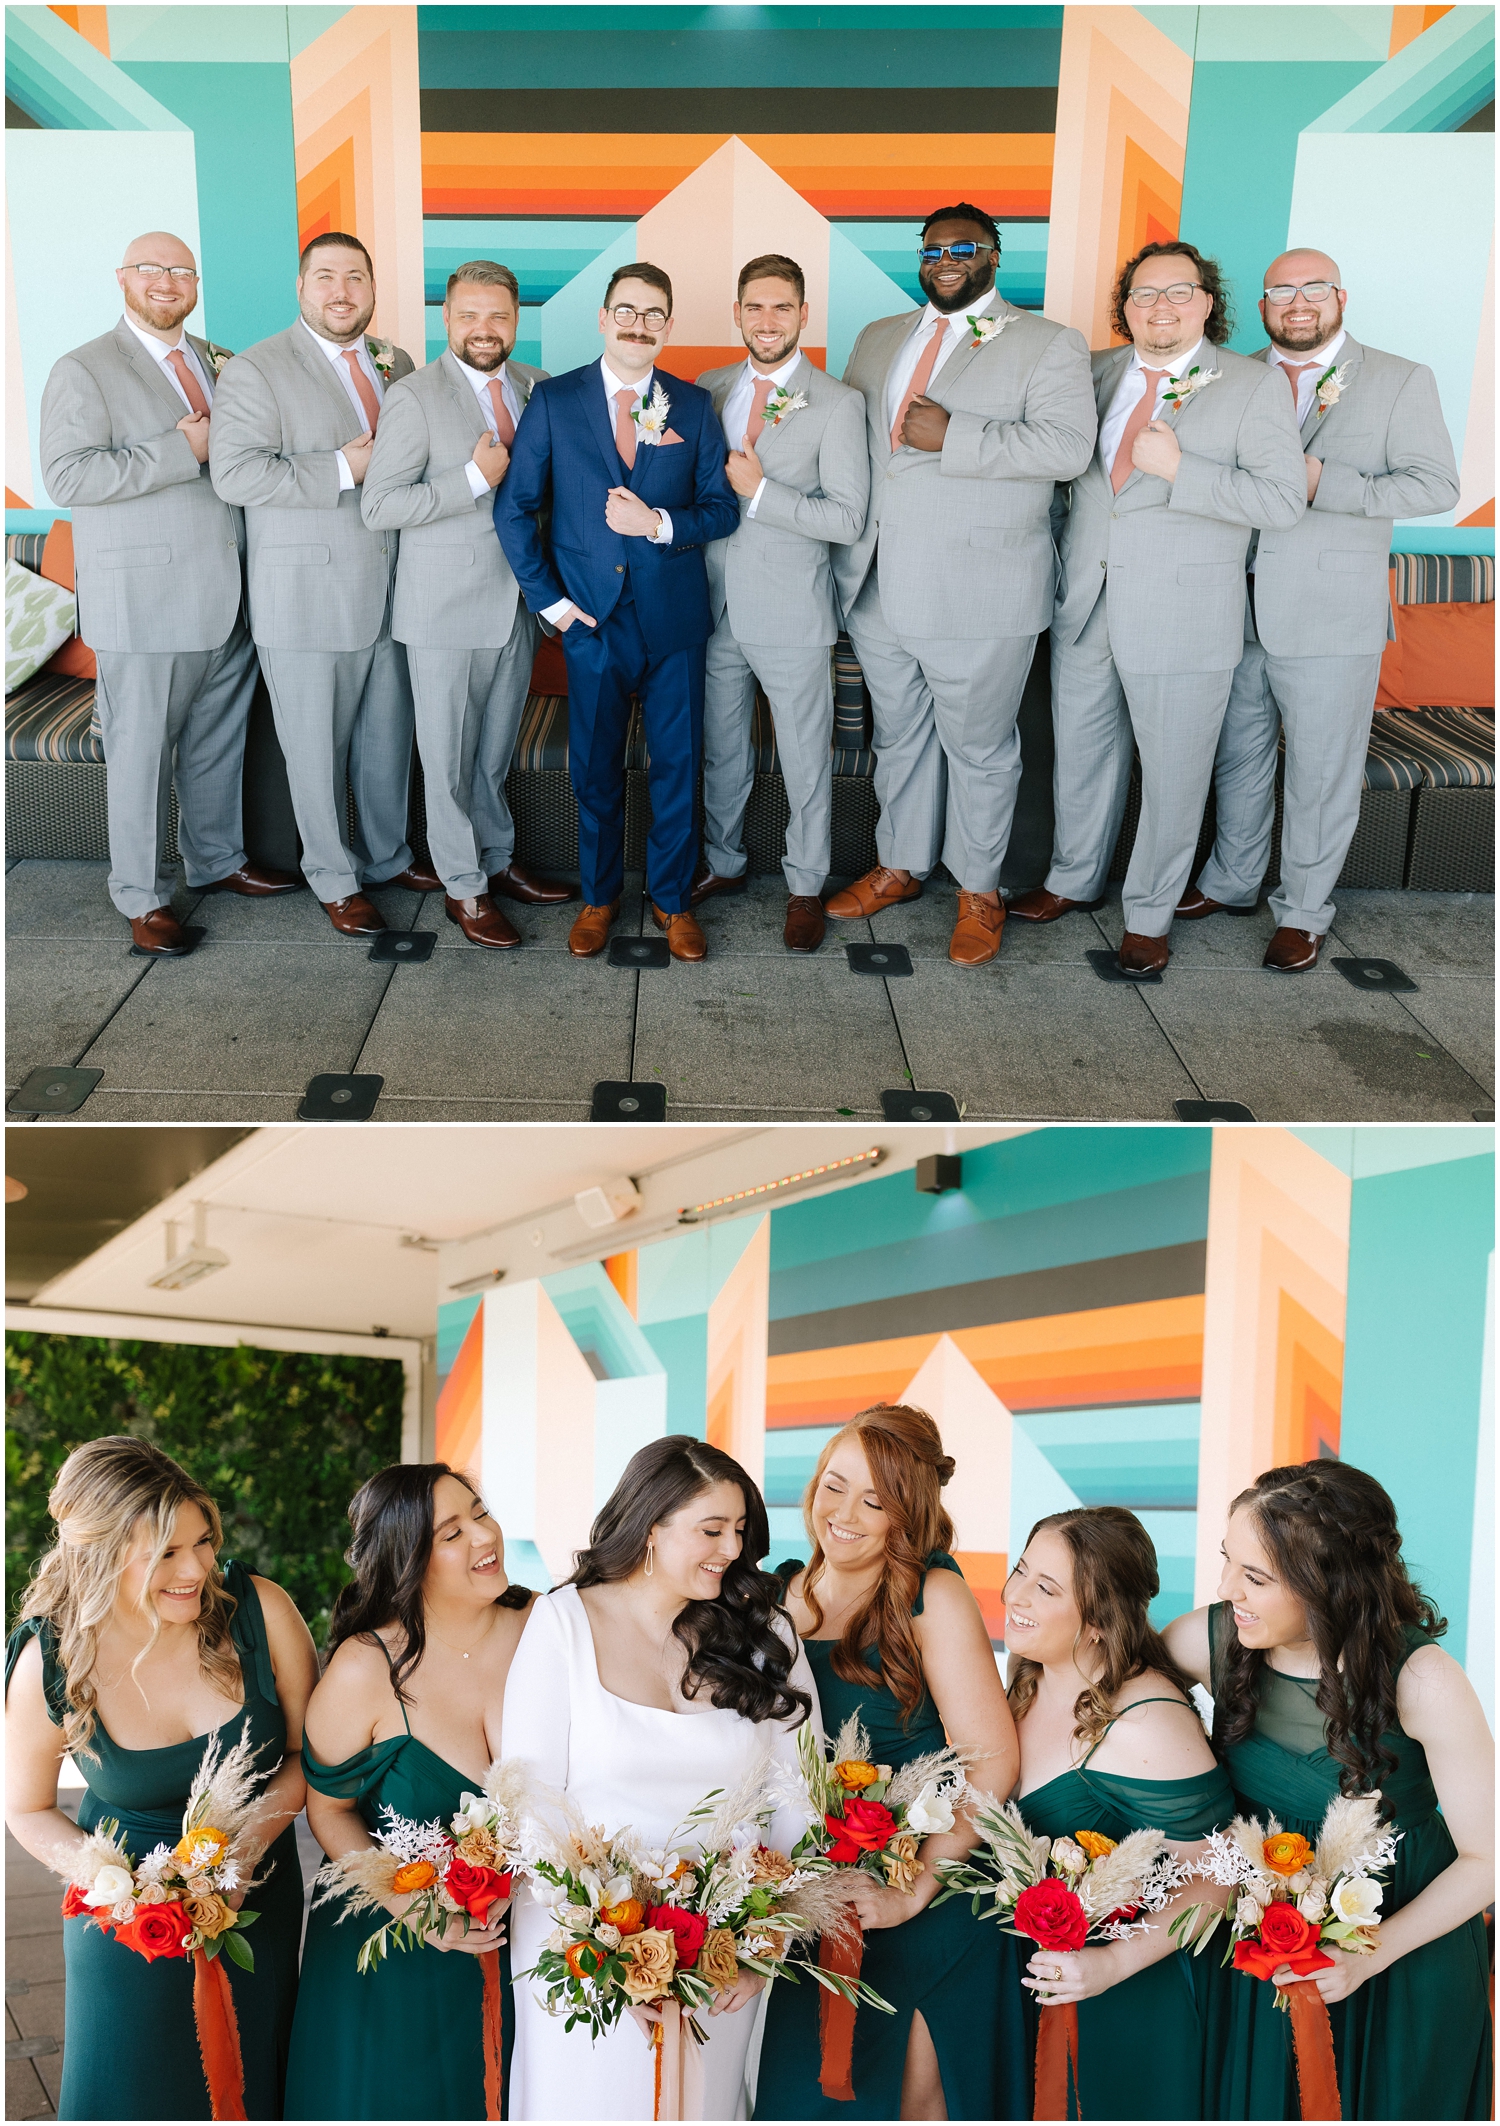 couple poses with their wedding party in front of a colorful wall in Tampa, FL